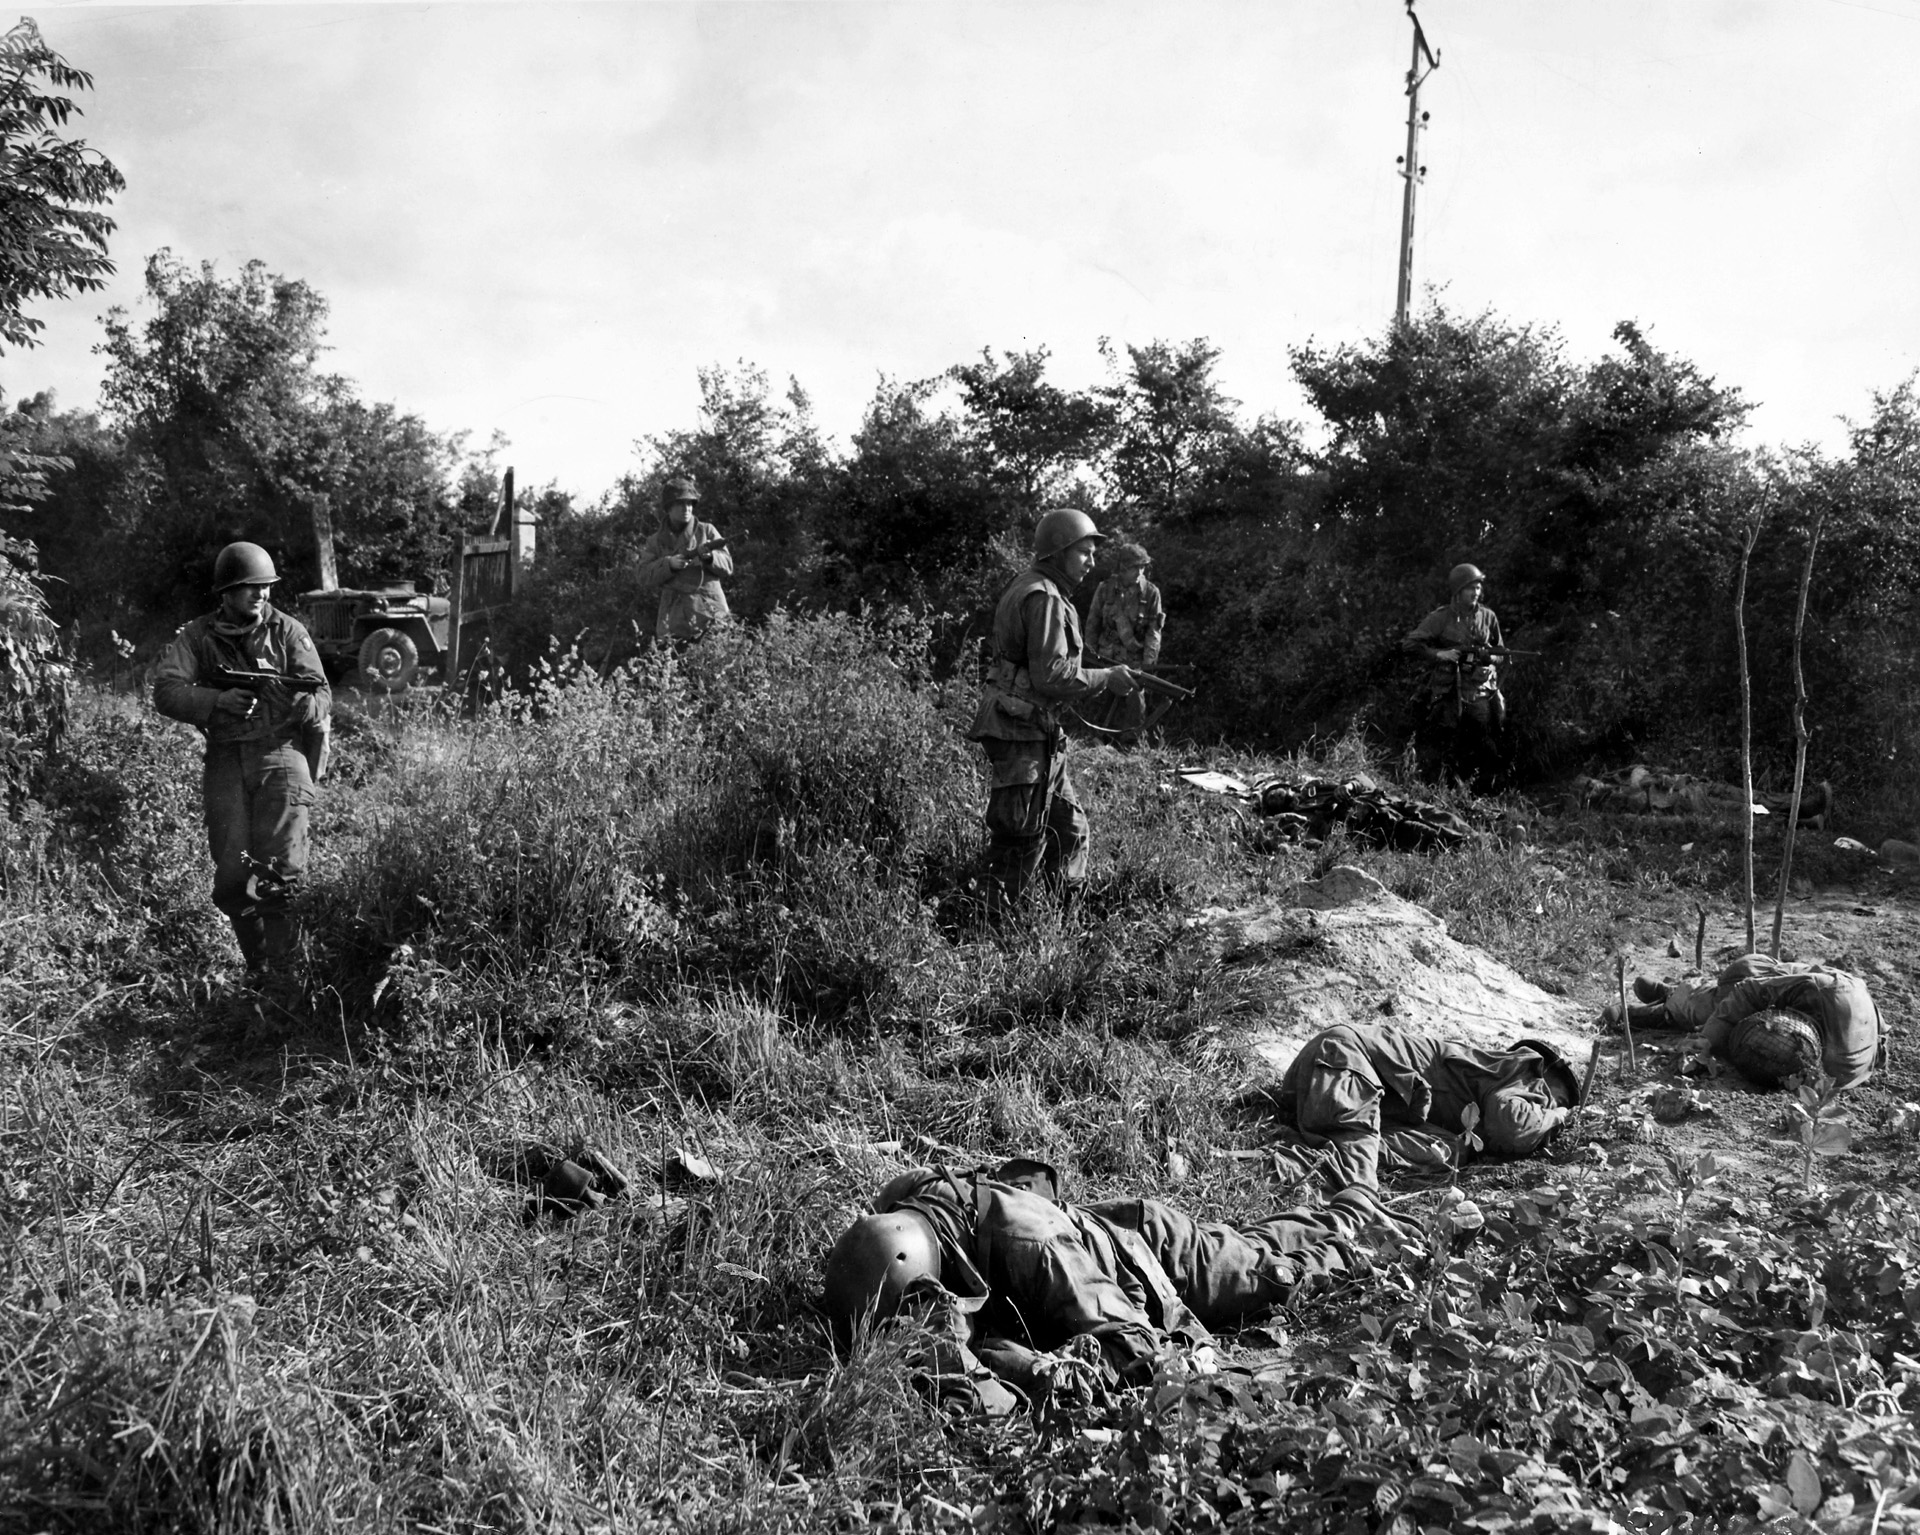 American paratroopers, with their weapons at the ready, advance cautiously through a field near Carentan littered with the bodies of their comrades, picked off by German sharpshooters, June 14, 1944.